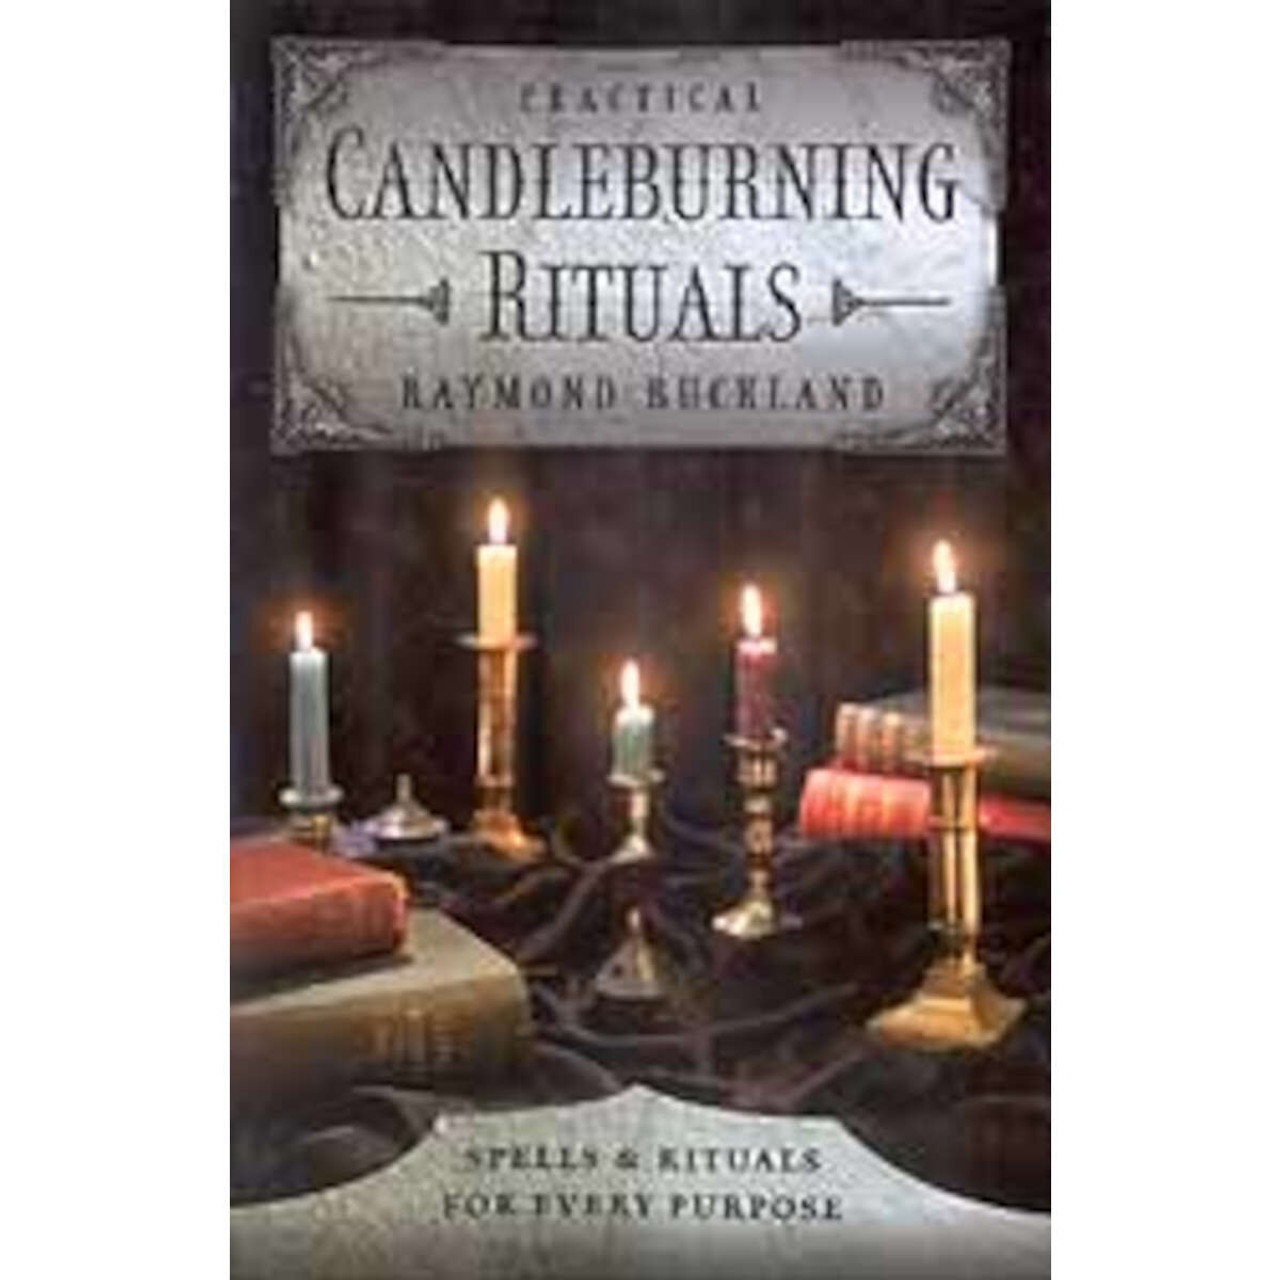 Practical Candle burning Rituals by Raymond Buckland